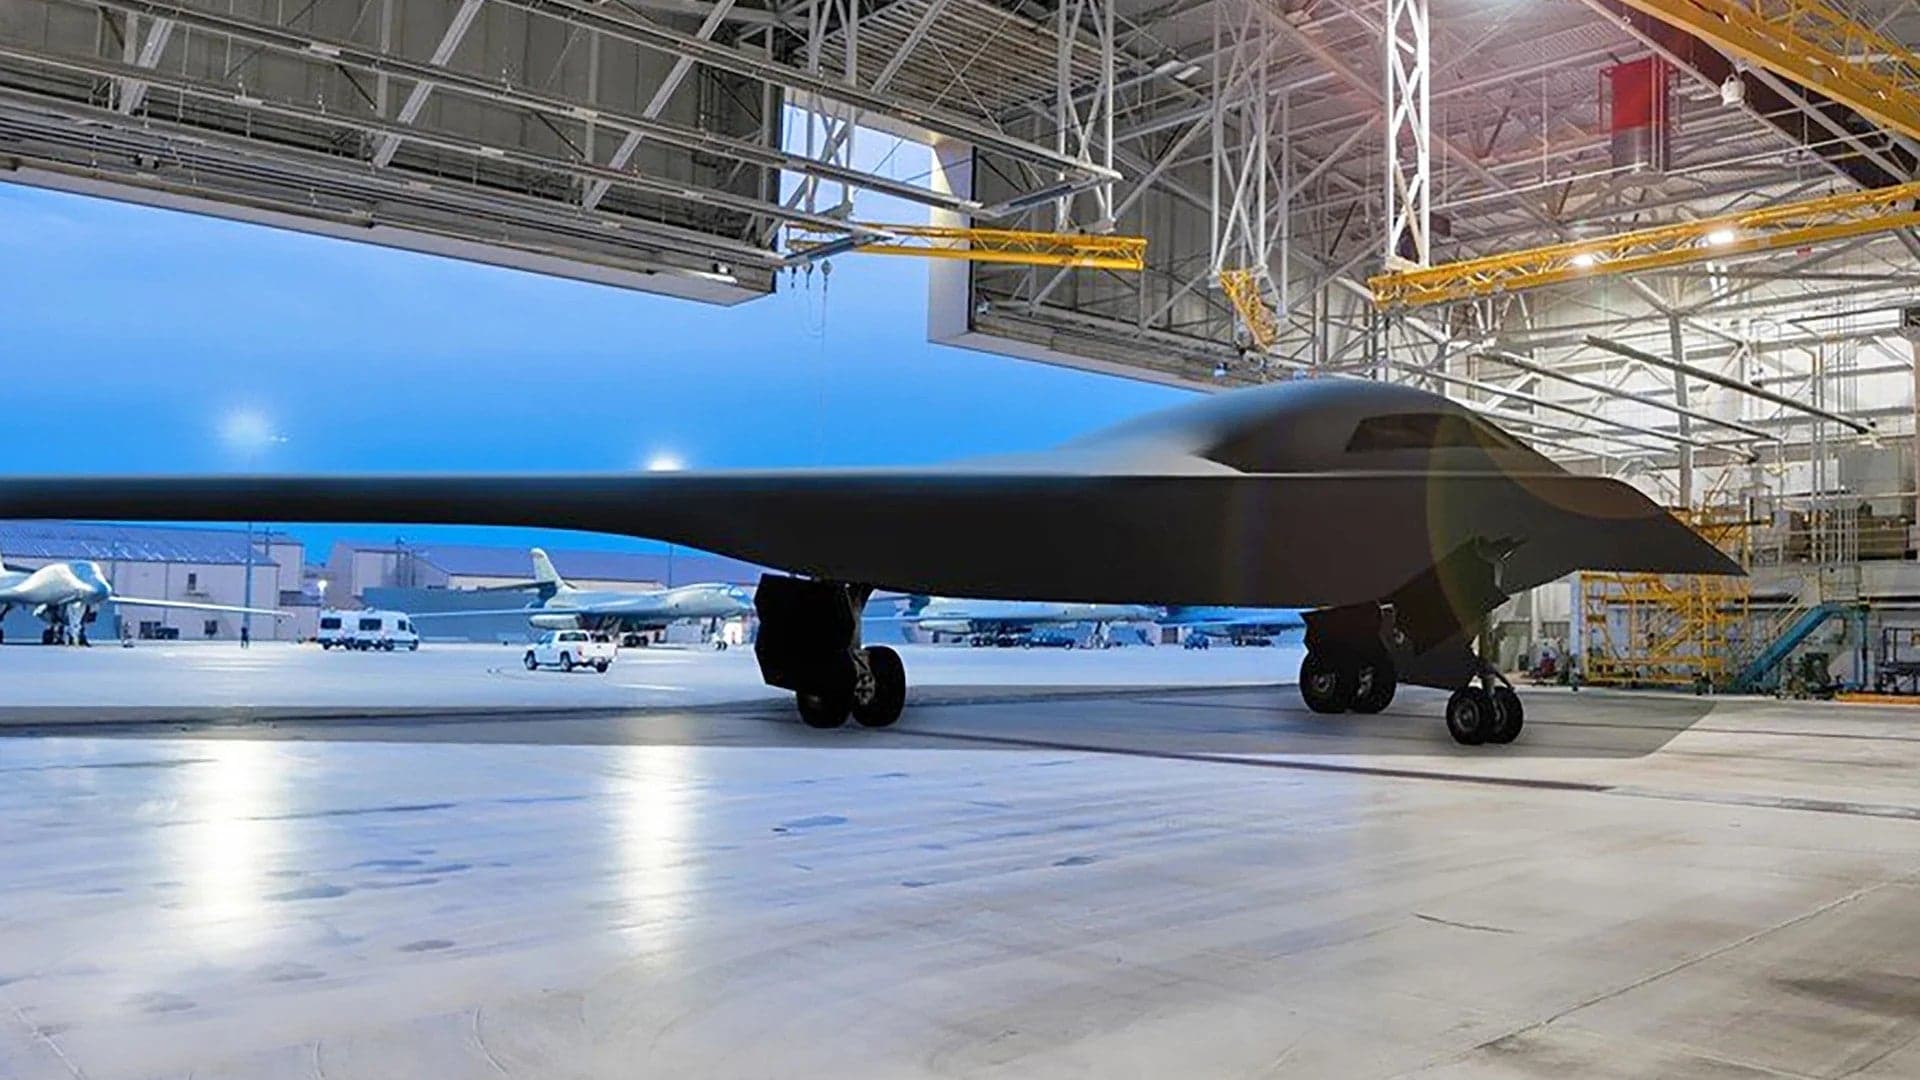 Plan To Buy 145 B-21 Raider Bombers Gets Endorsement From Biden Air Force Nominee